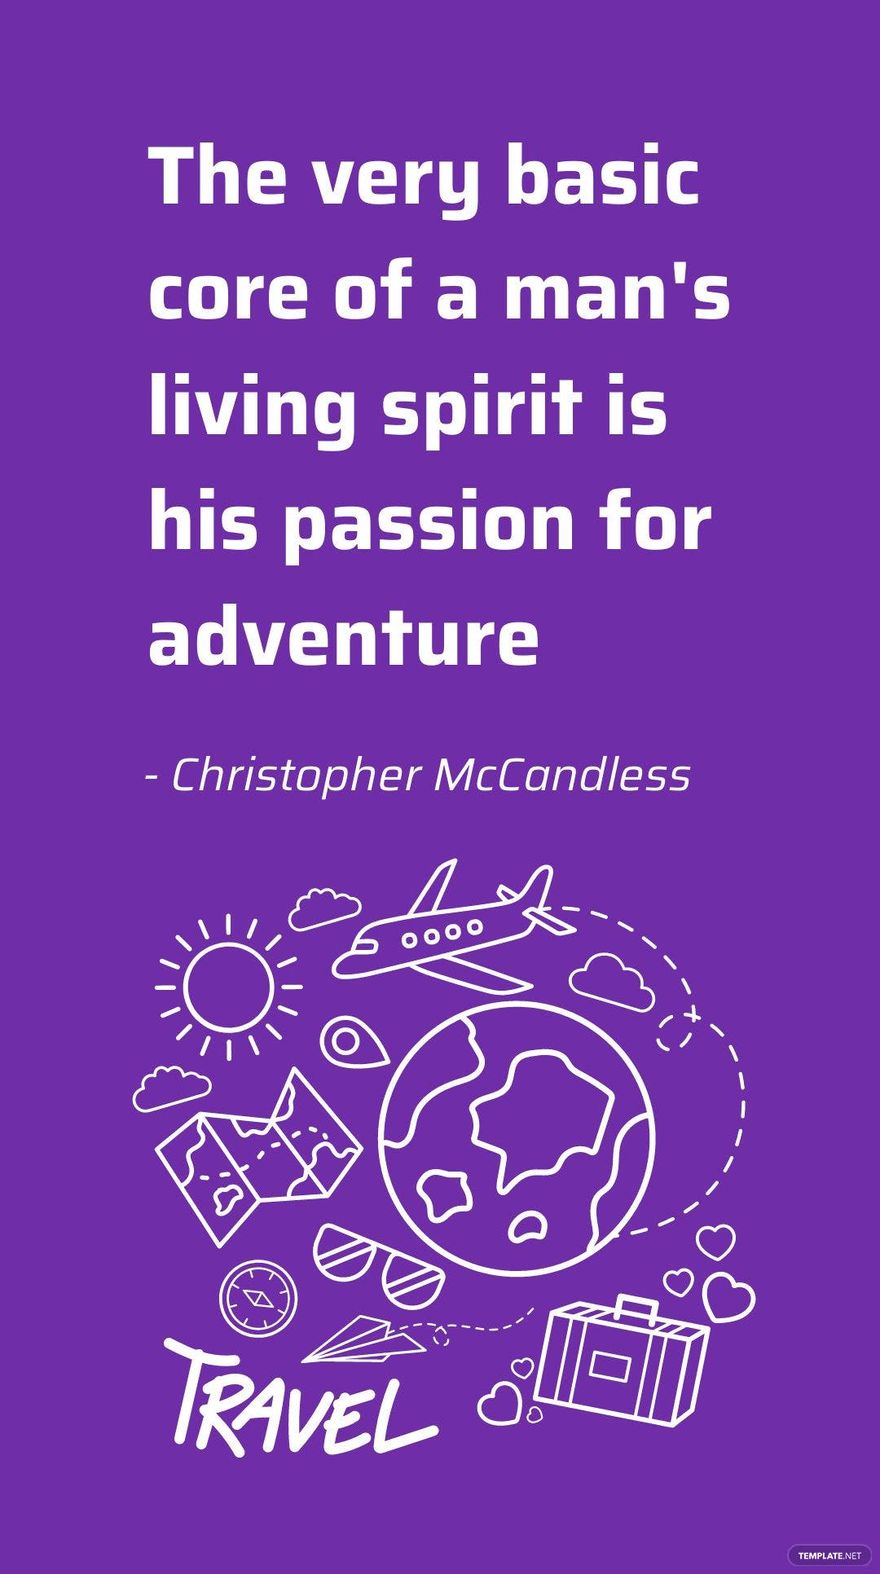 Free Christopher McCandless - The very basic core of a man's living spirit is his passion for adventure in JPG